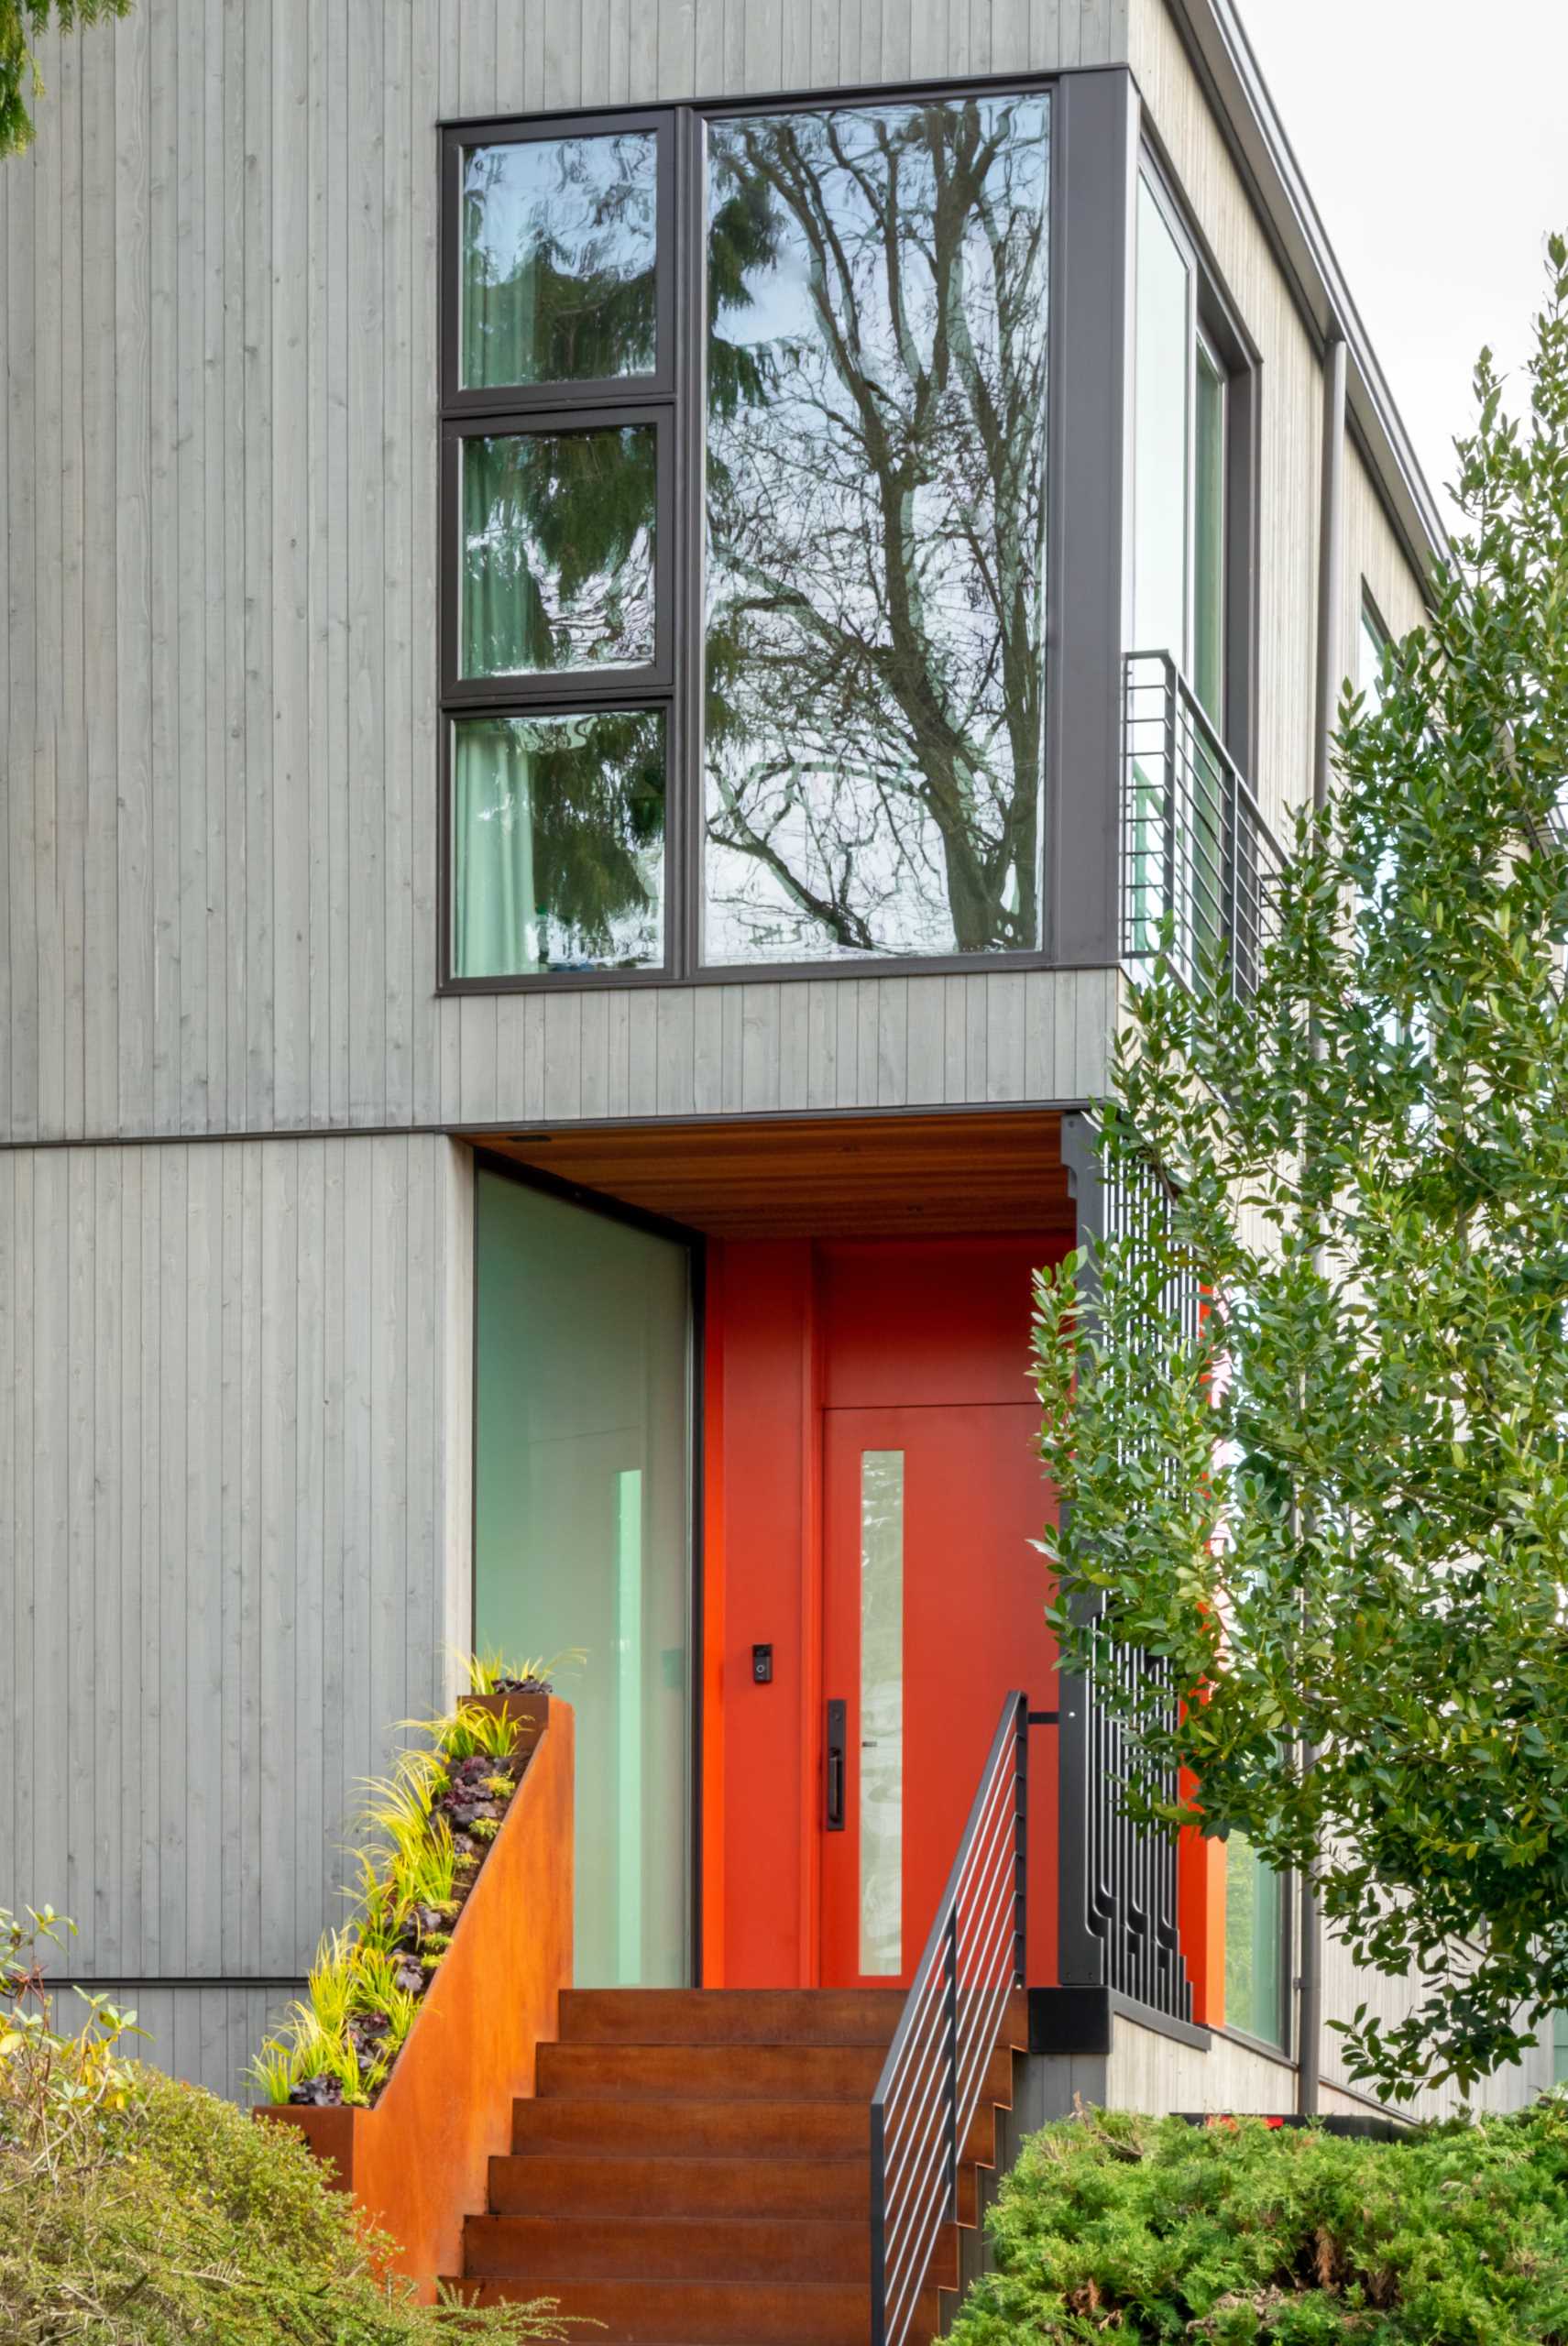 A modern house with a colorful front door, a steel planter, and a screen for added privacy.